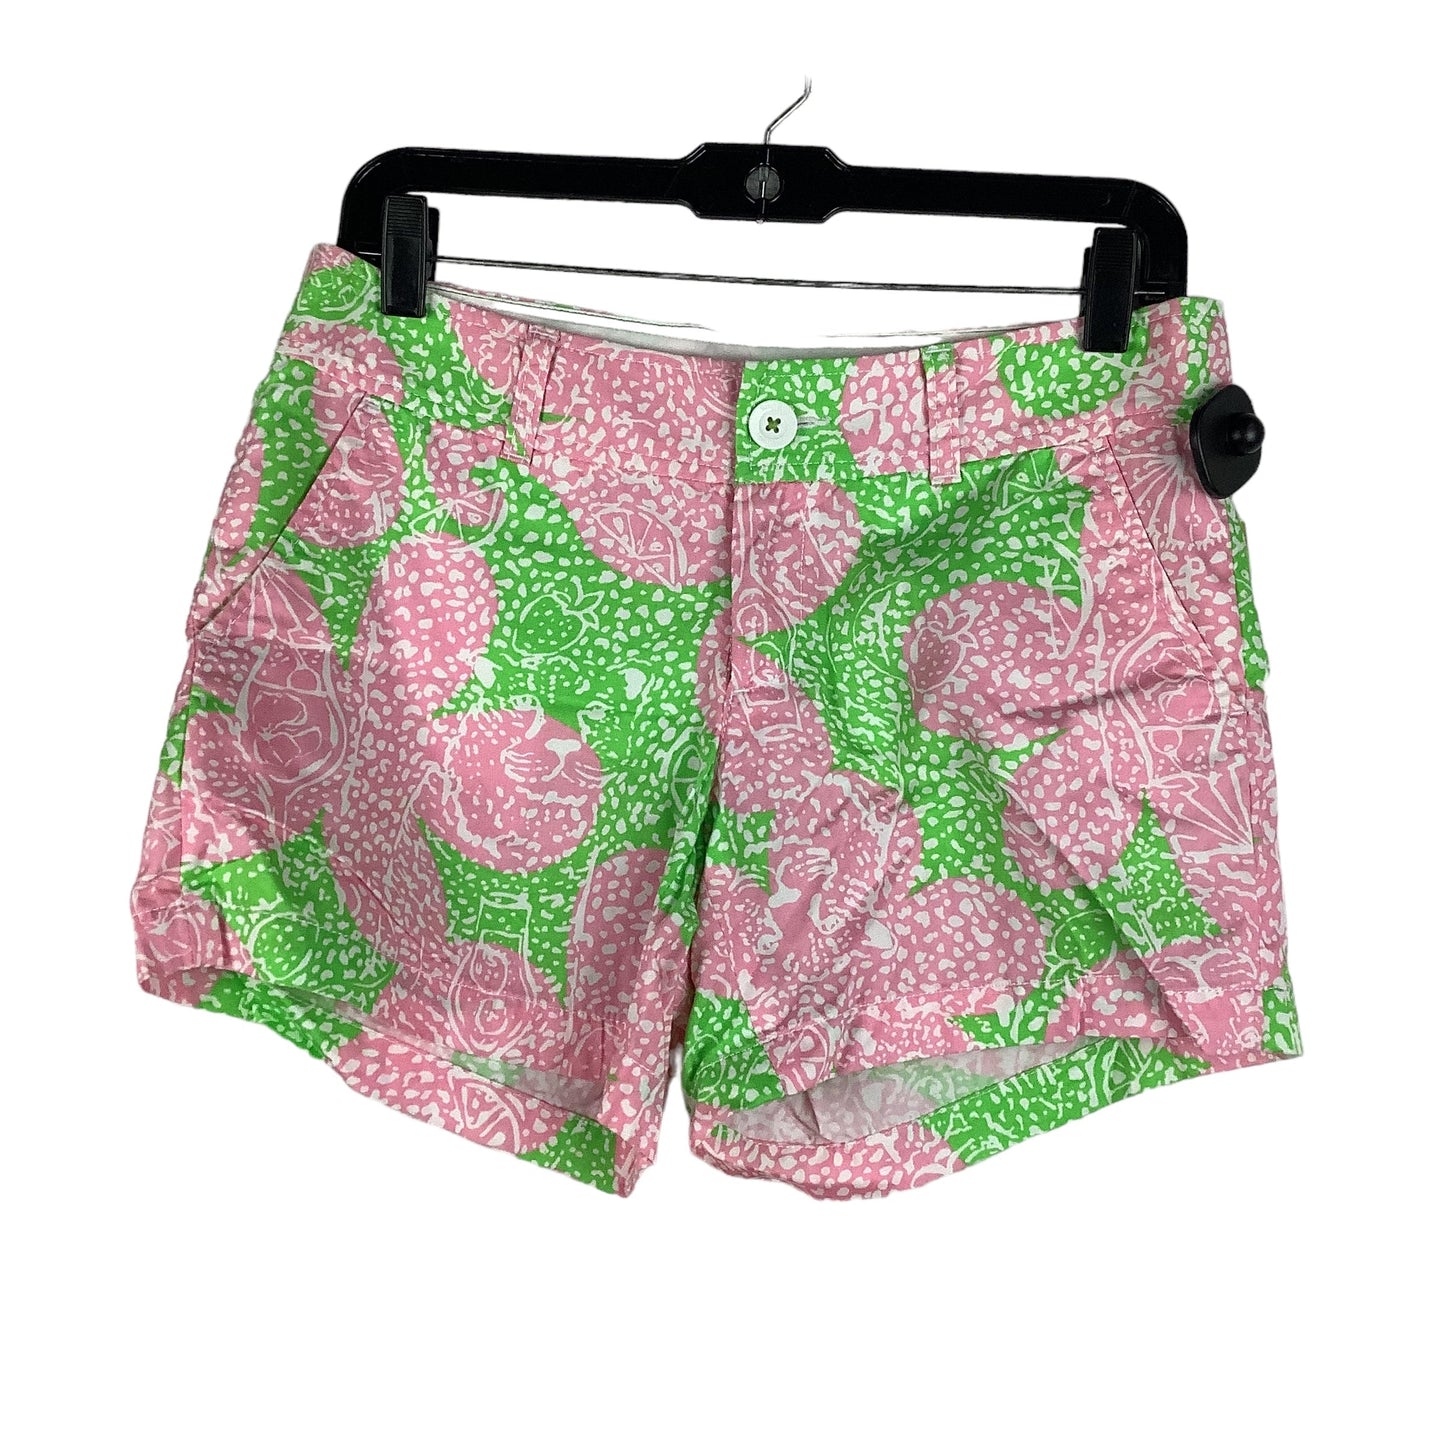 Green & Pink Shorts Designer Lilly Pulitzer, Size 4